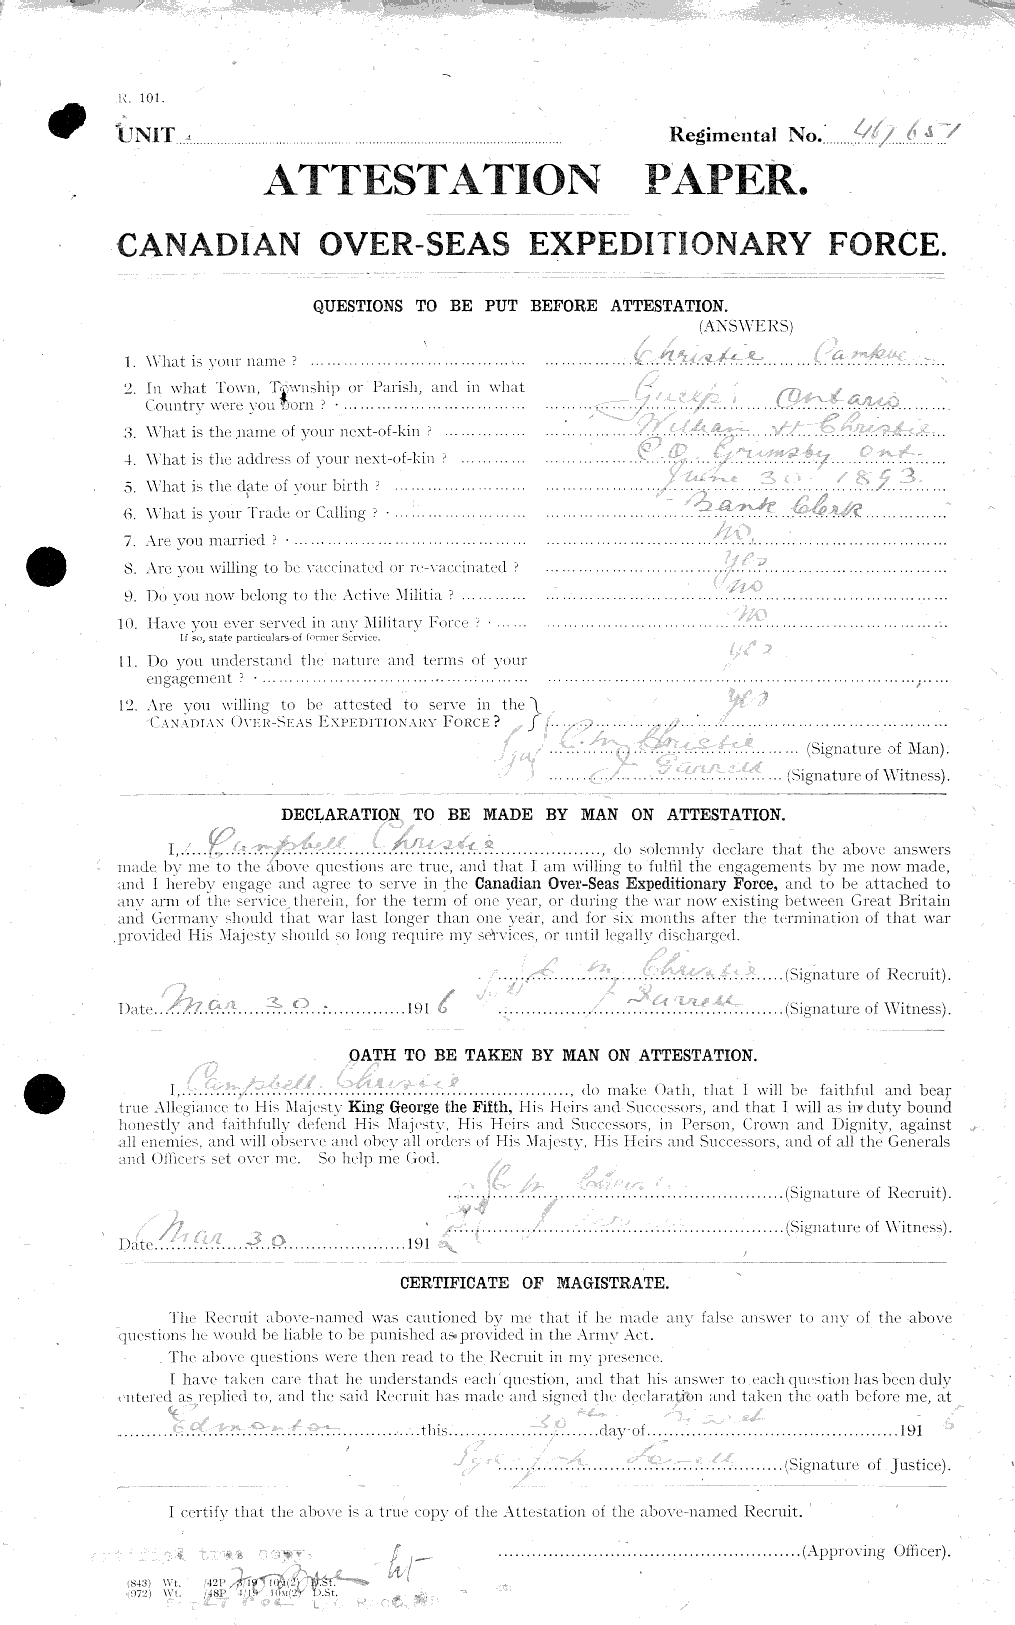 Personnel Records of the First World War - CEF 021887a